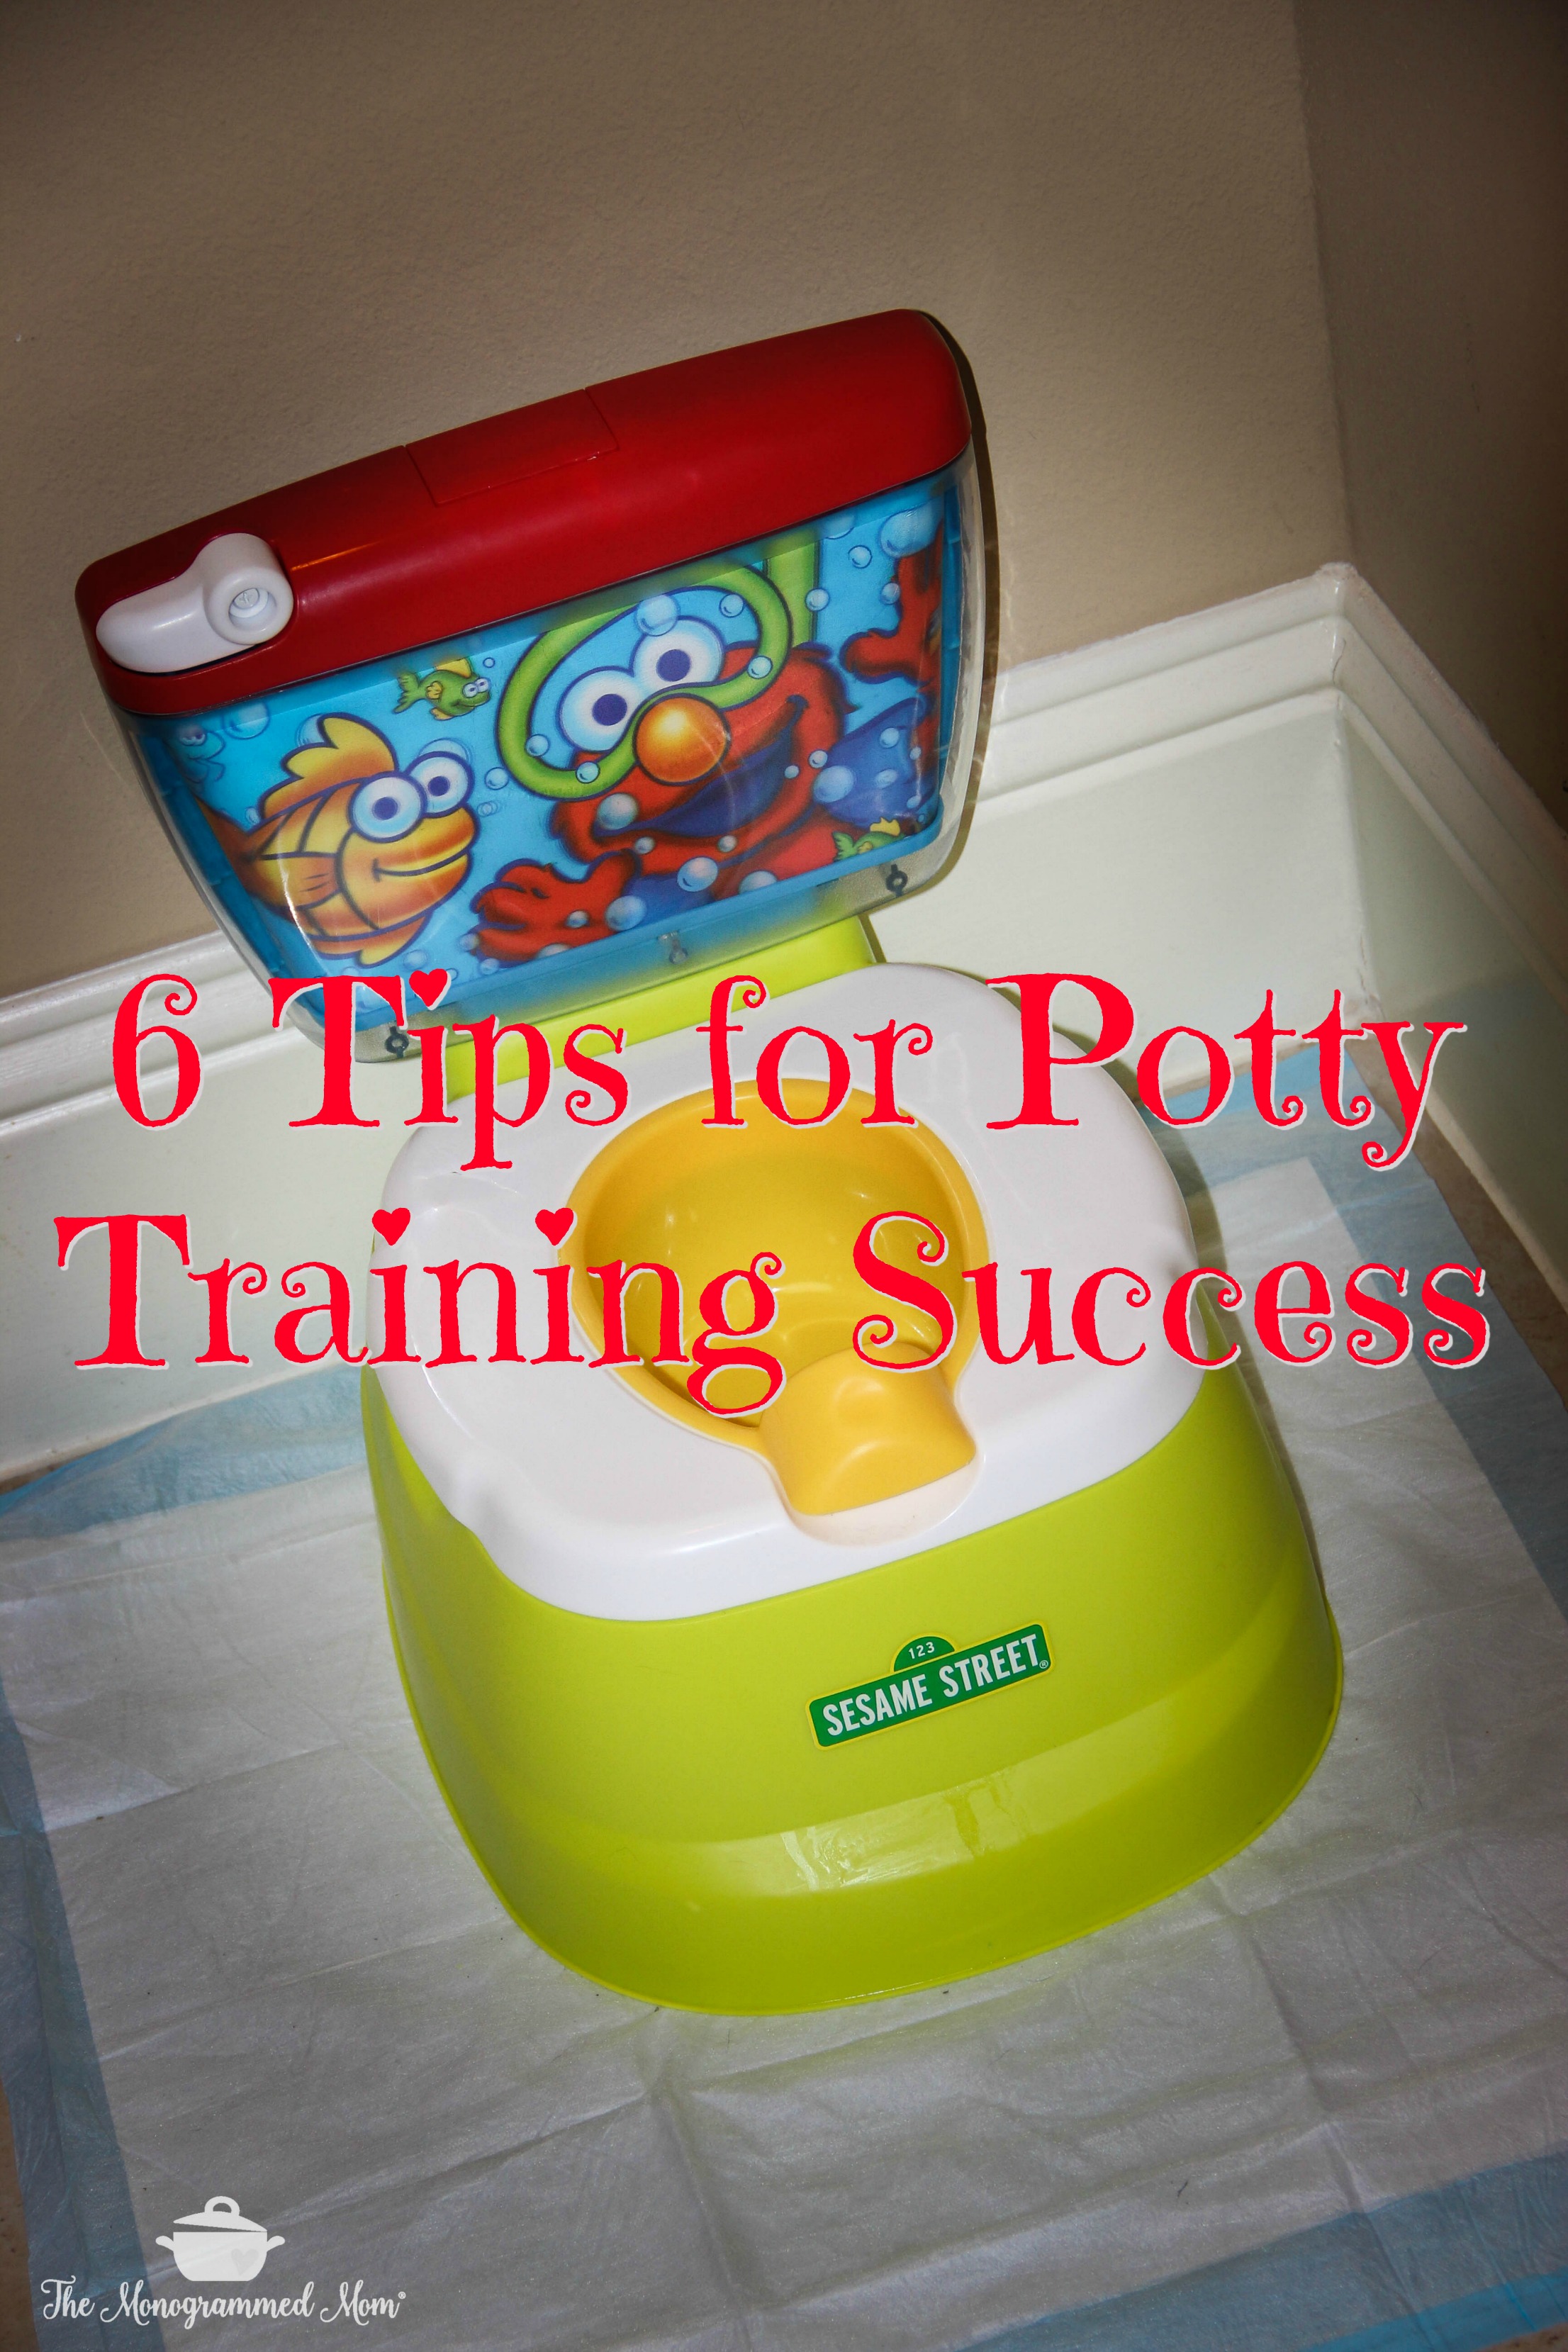 6 Tips for Potty Training Success